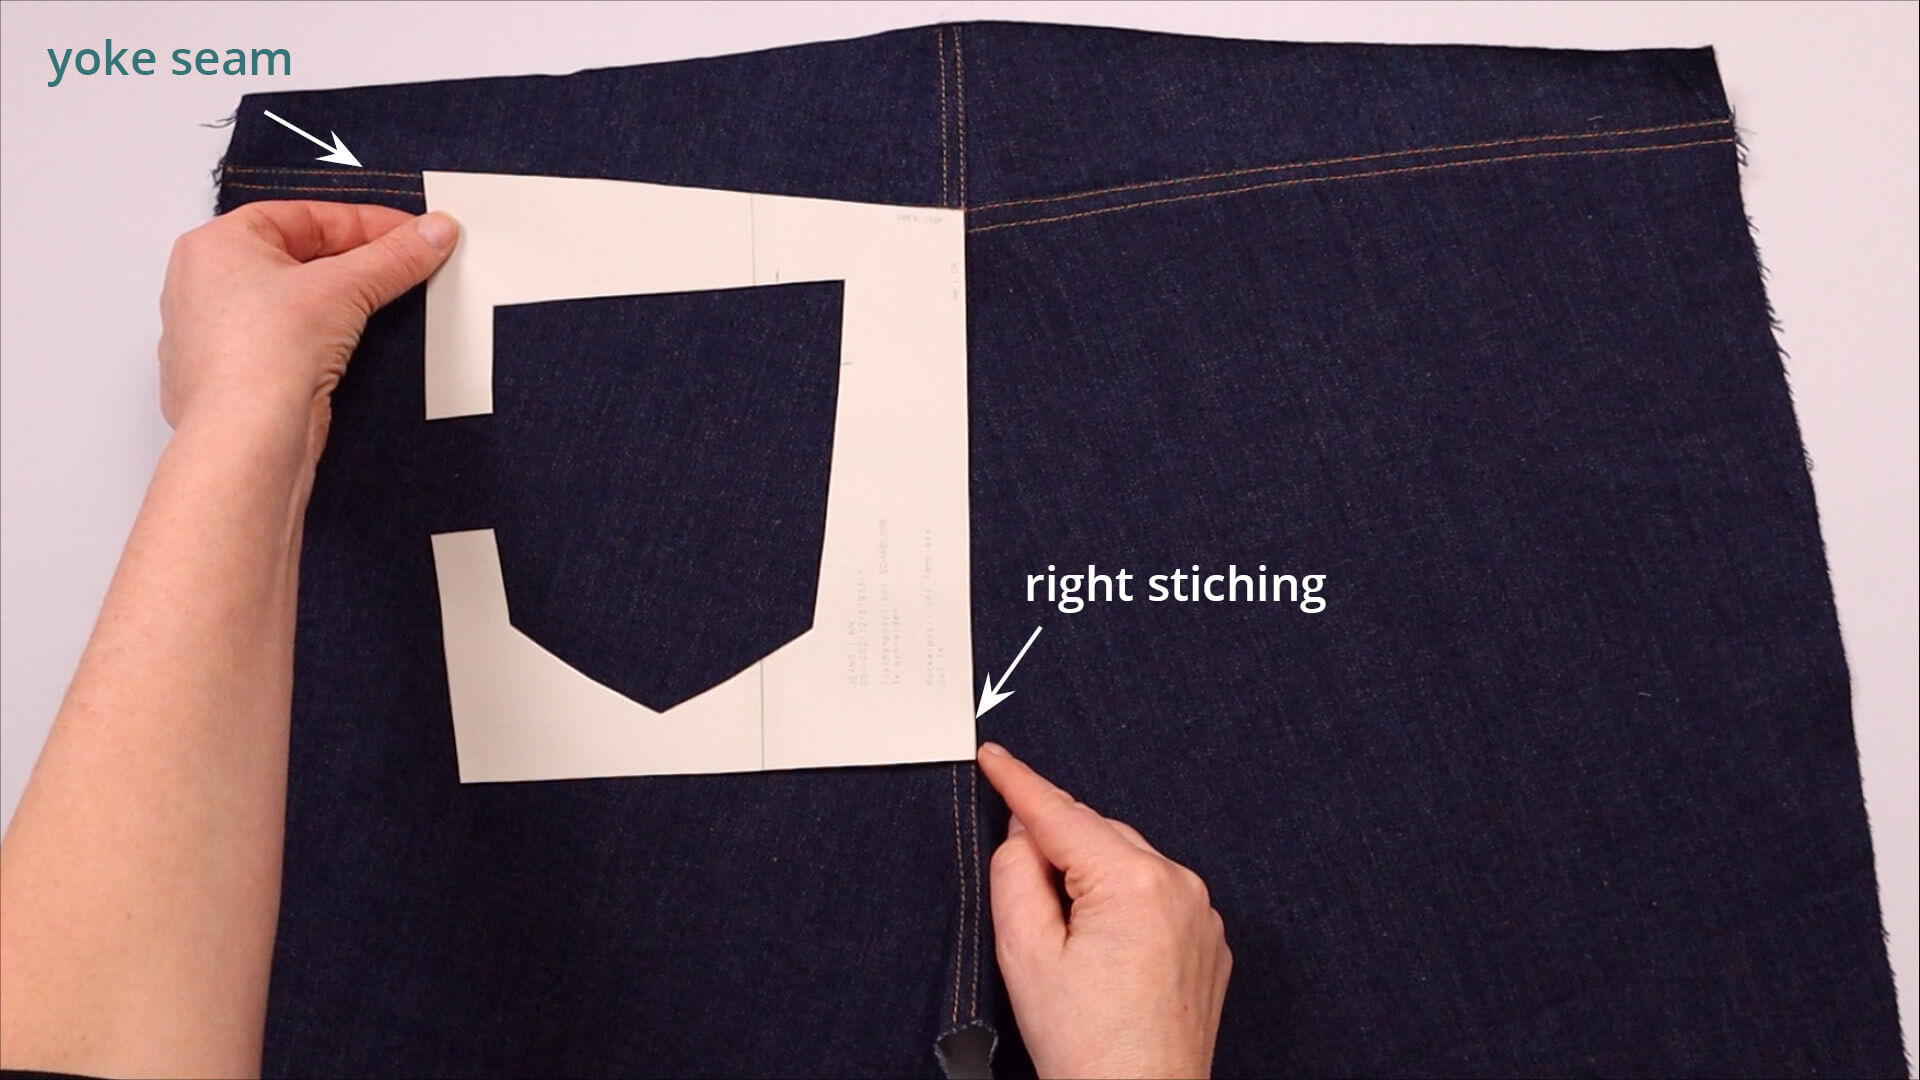 smartPATTERN sewing instructions for patch back pocket of a pair of jeans - place pocket marker template on the left